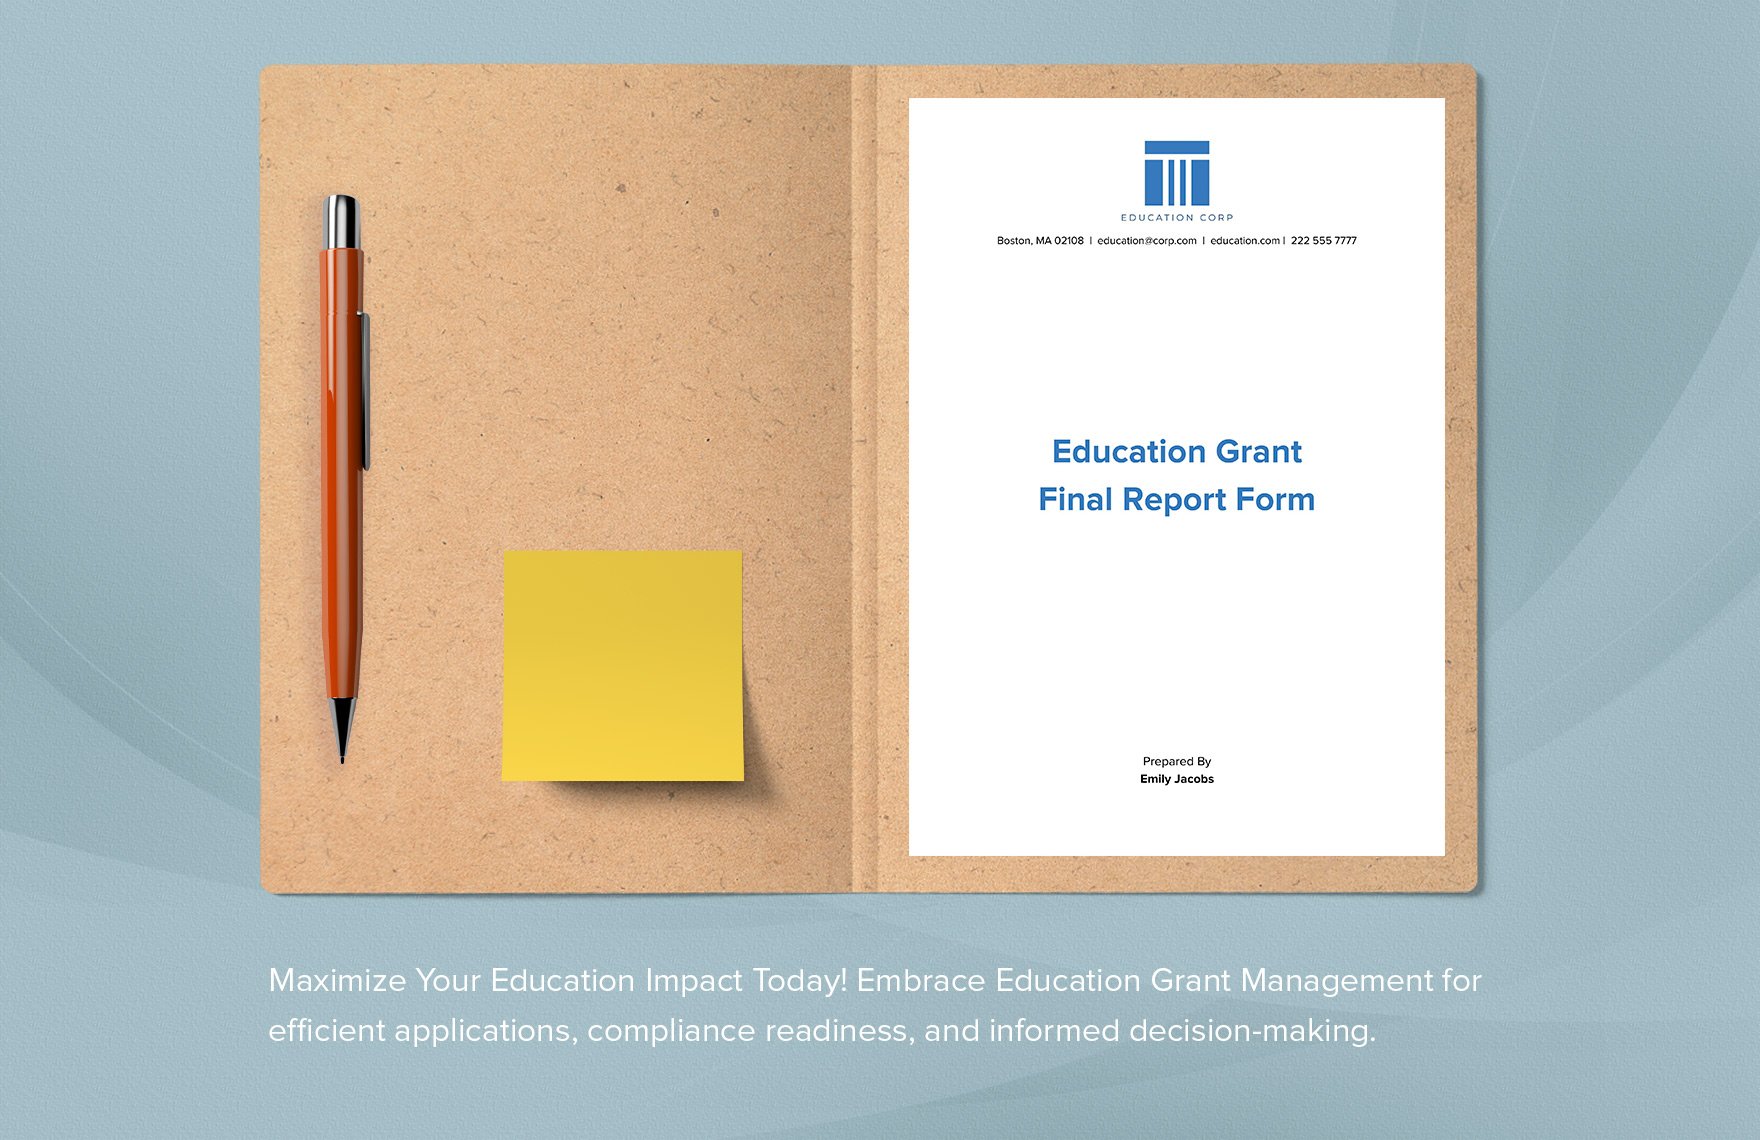 Education Grant Final Report Form Template